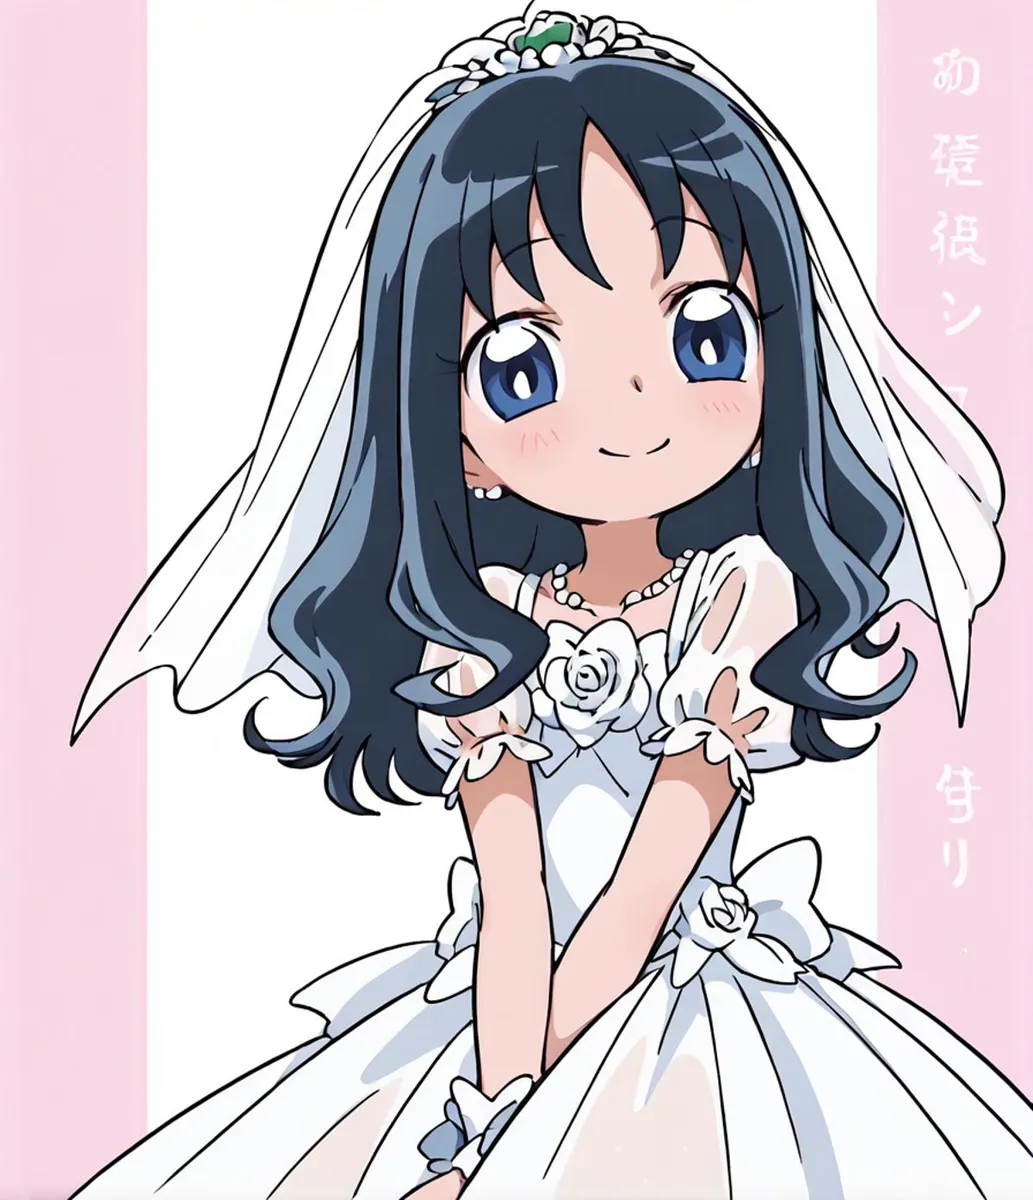 Anime-style image of a cute girl with blue hair, wearing a white bridal dress, a veil, and a tiara, created using Stable Diffusion.